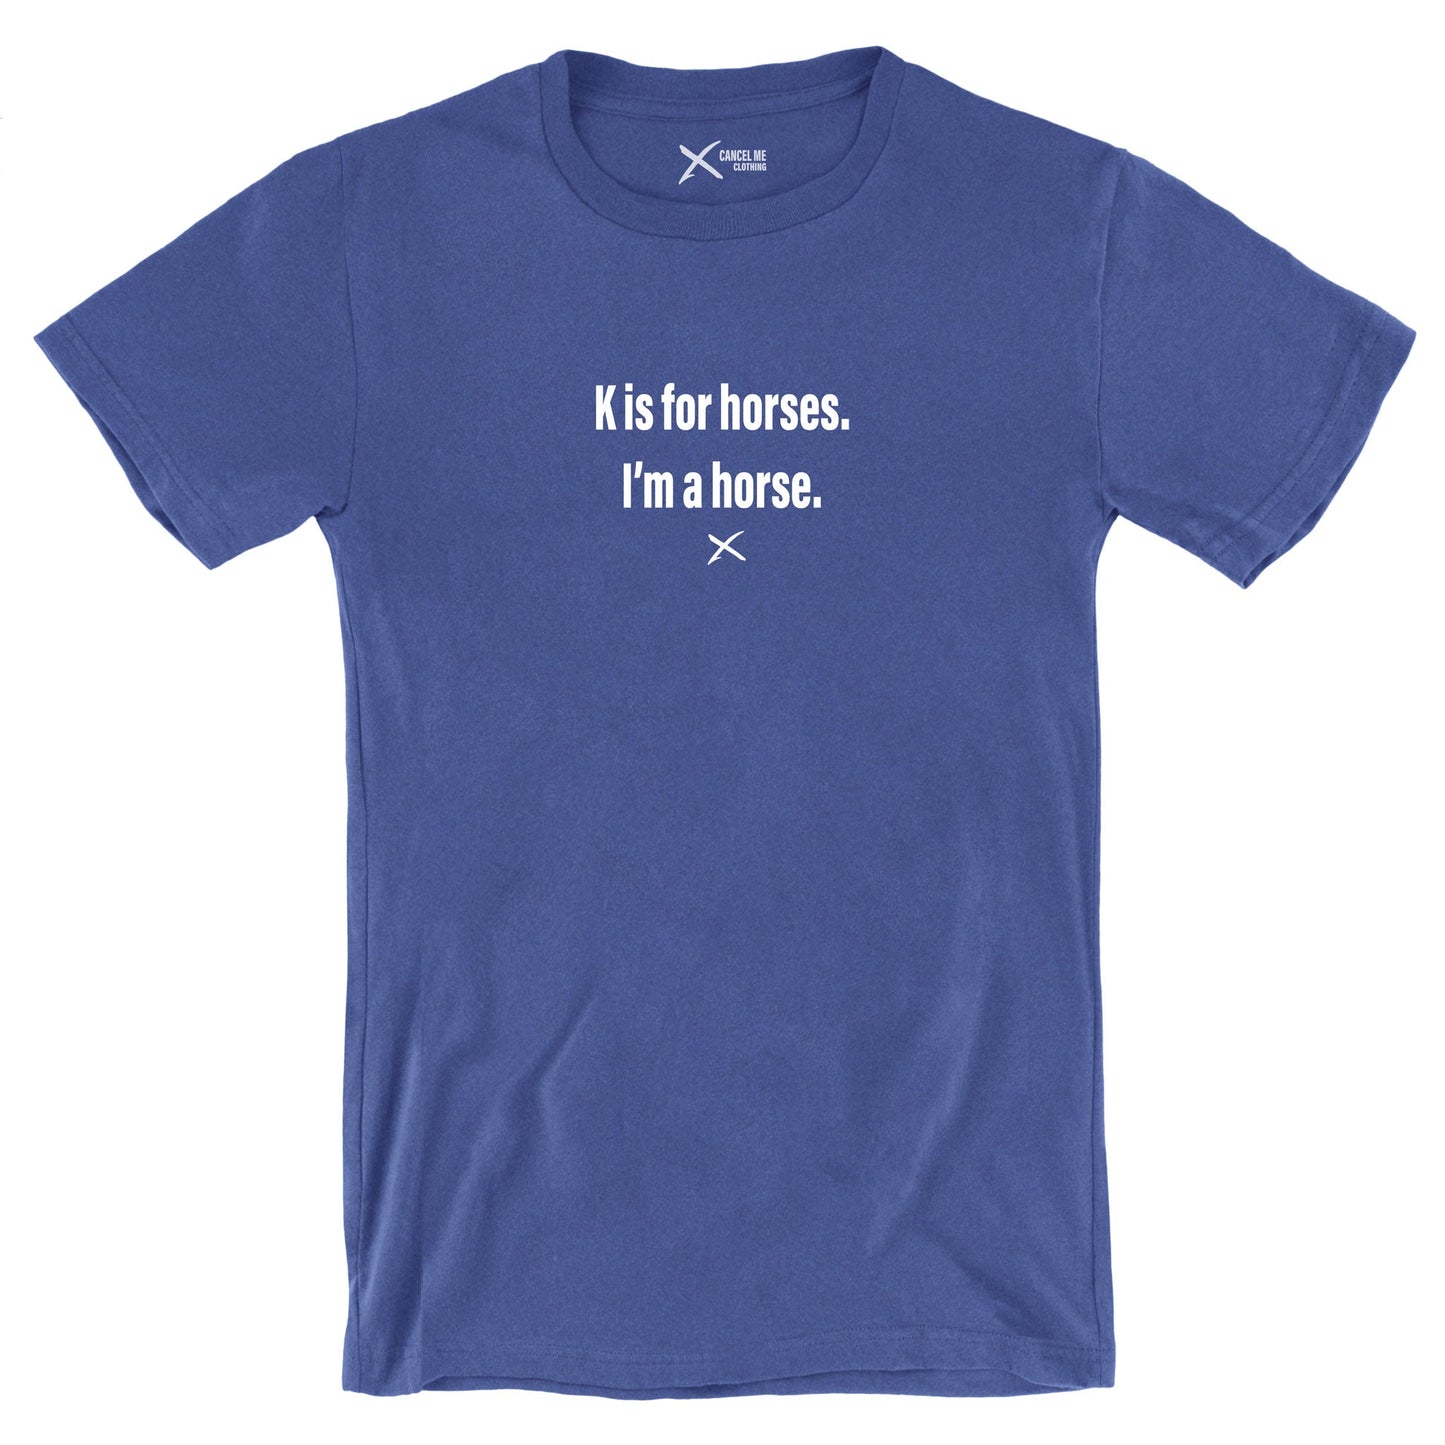 K is for horses. I'm a horse. - Shirt